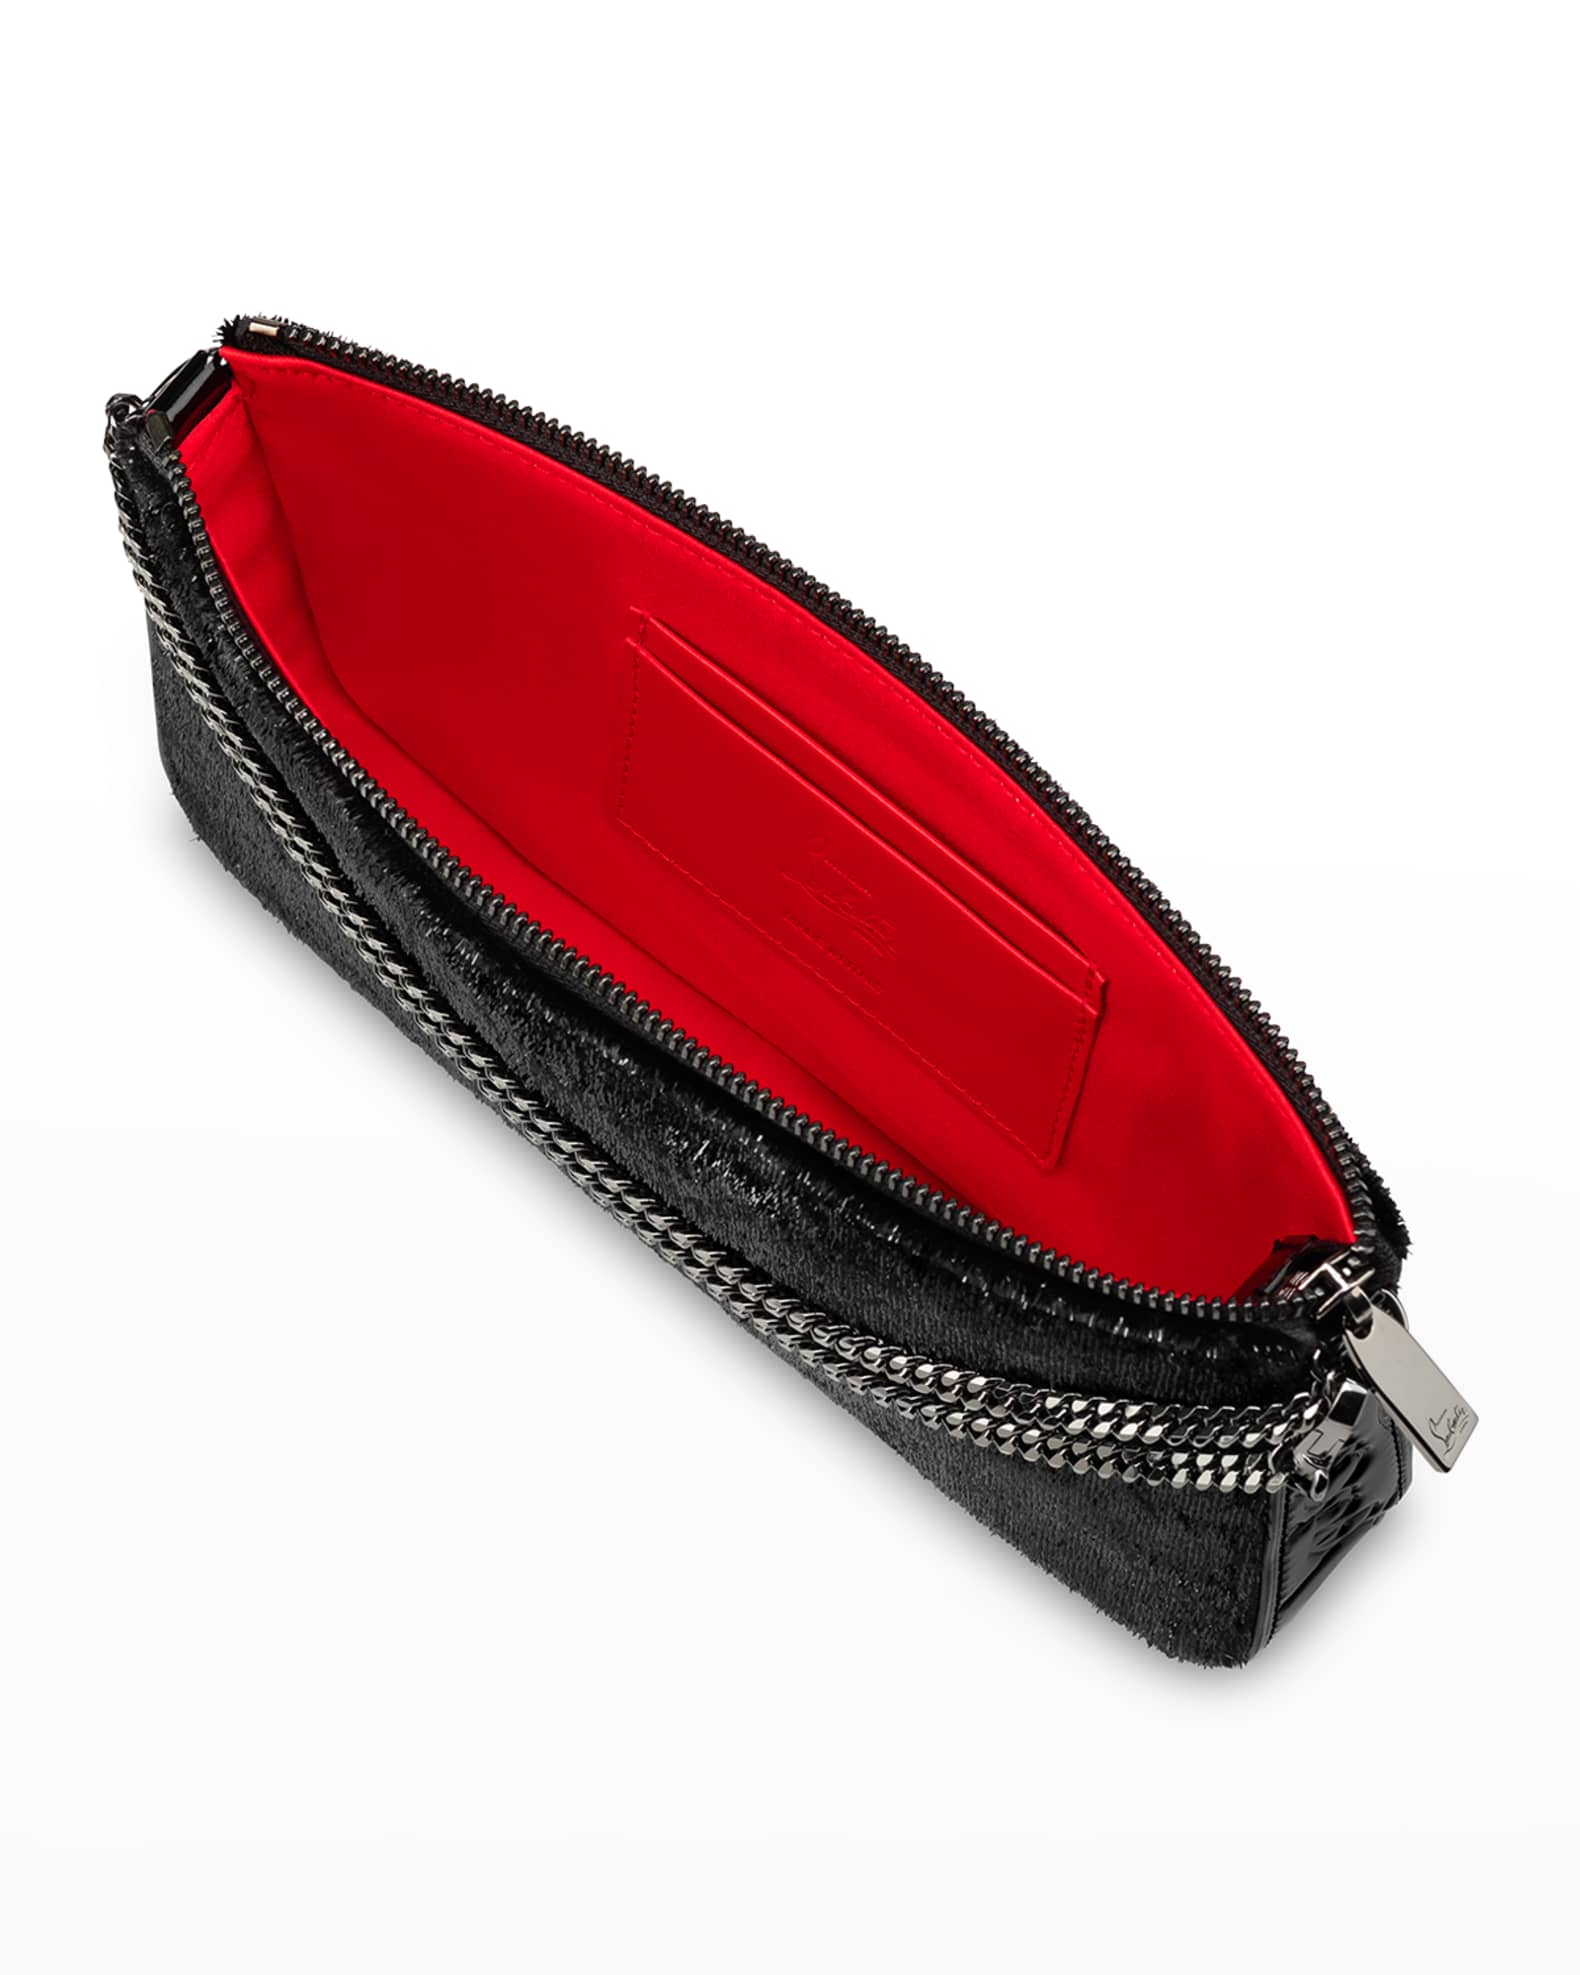 Christian Louboutin shoulder clutch Chain Bag Valentine Limited Black x Red  Rare